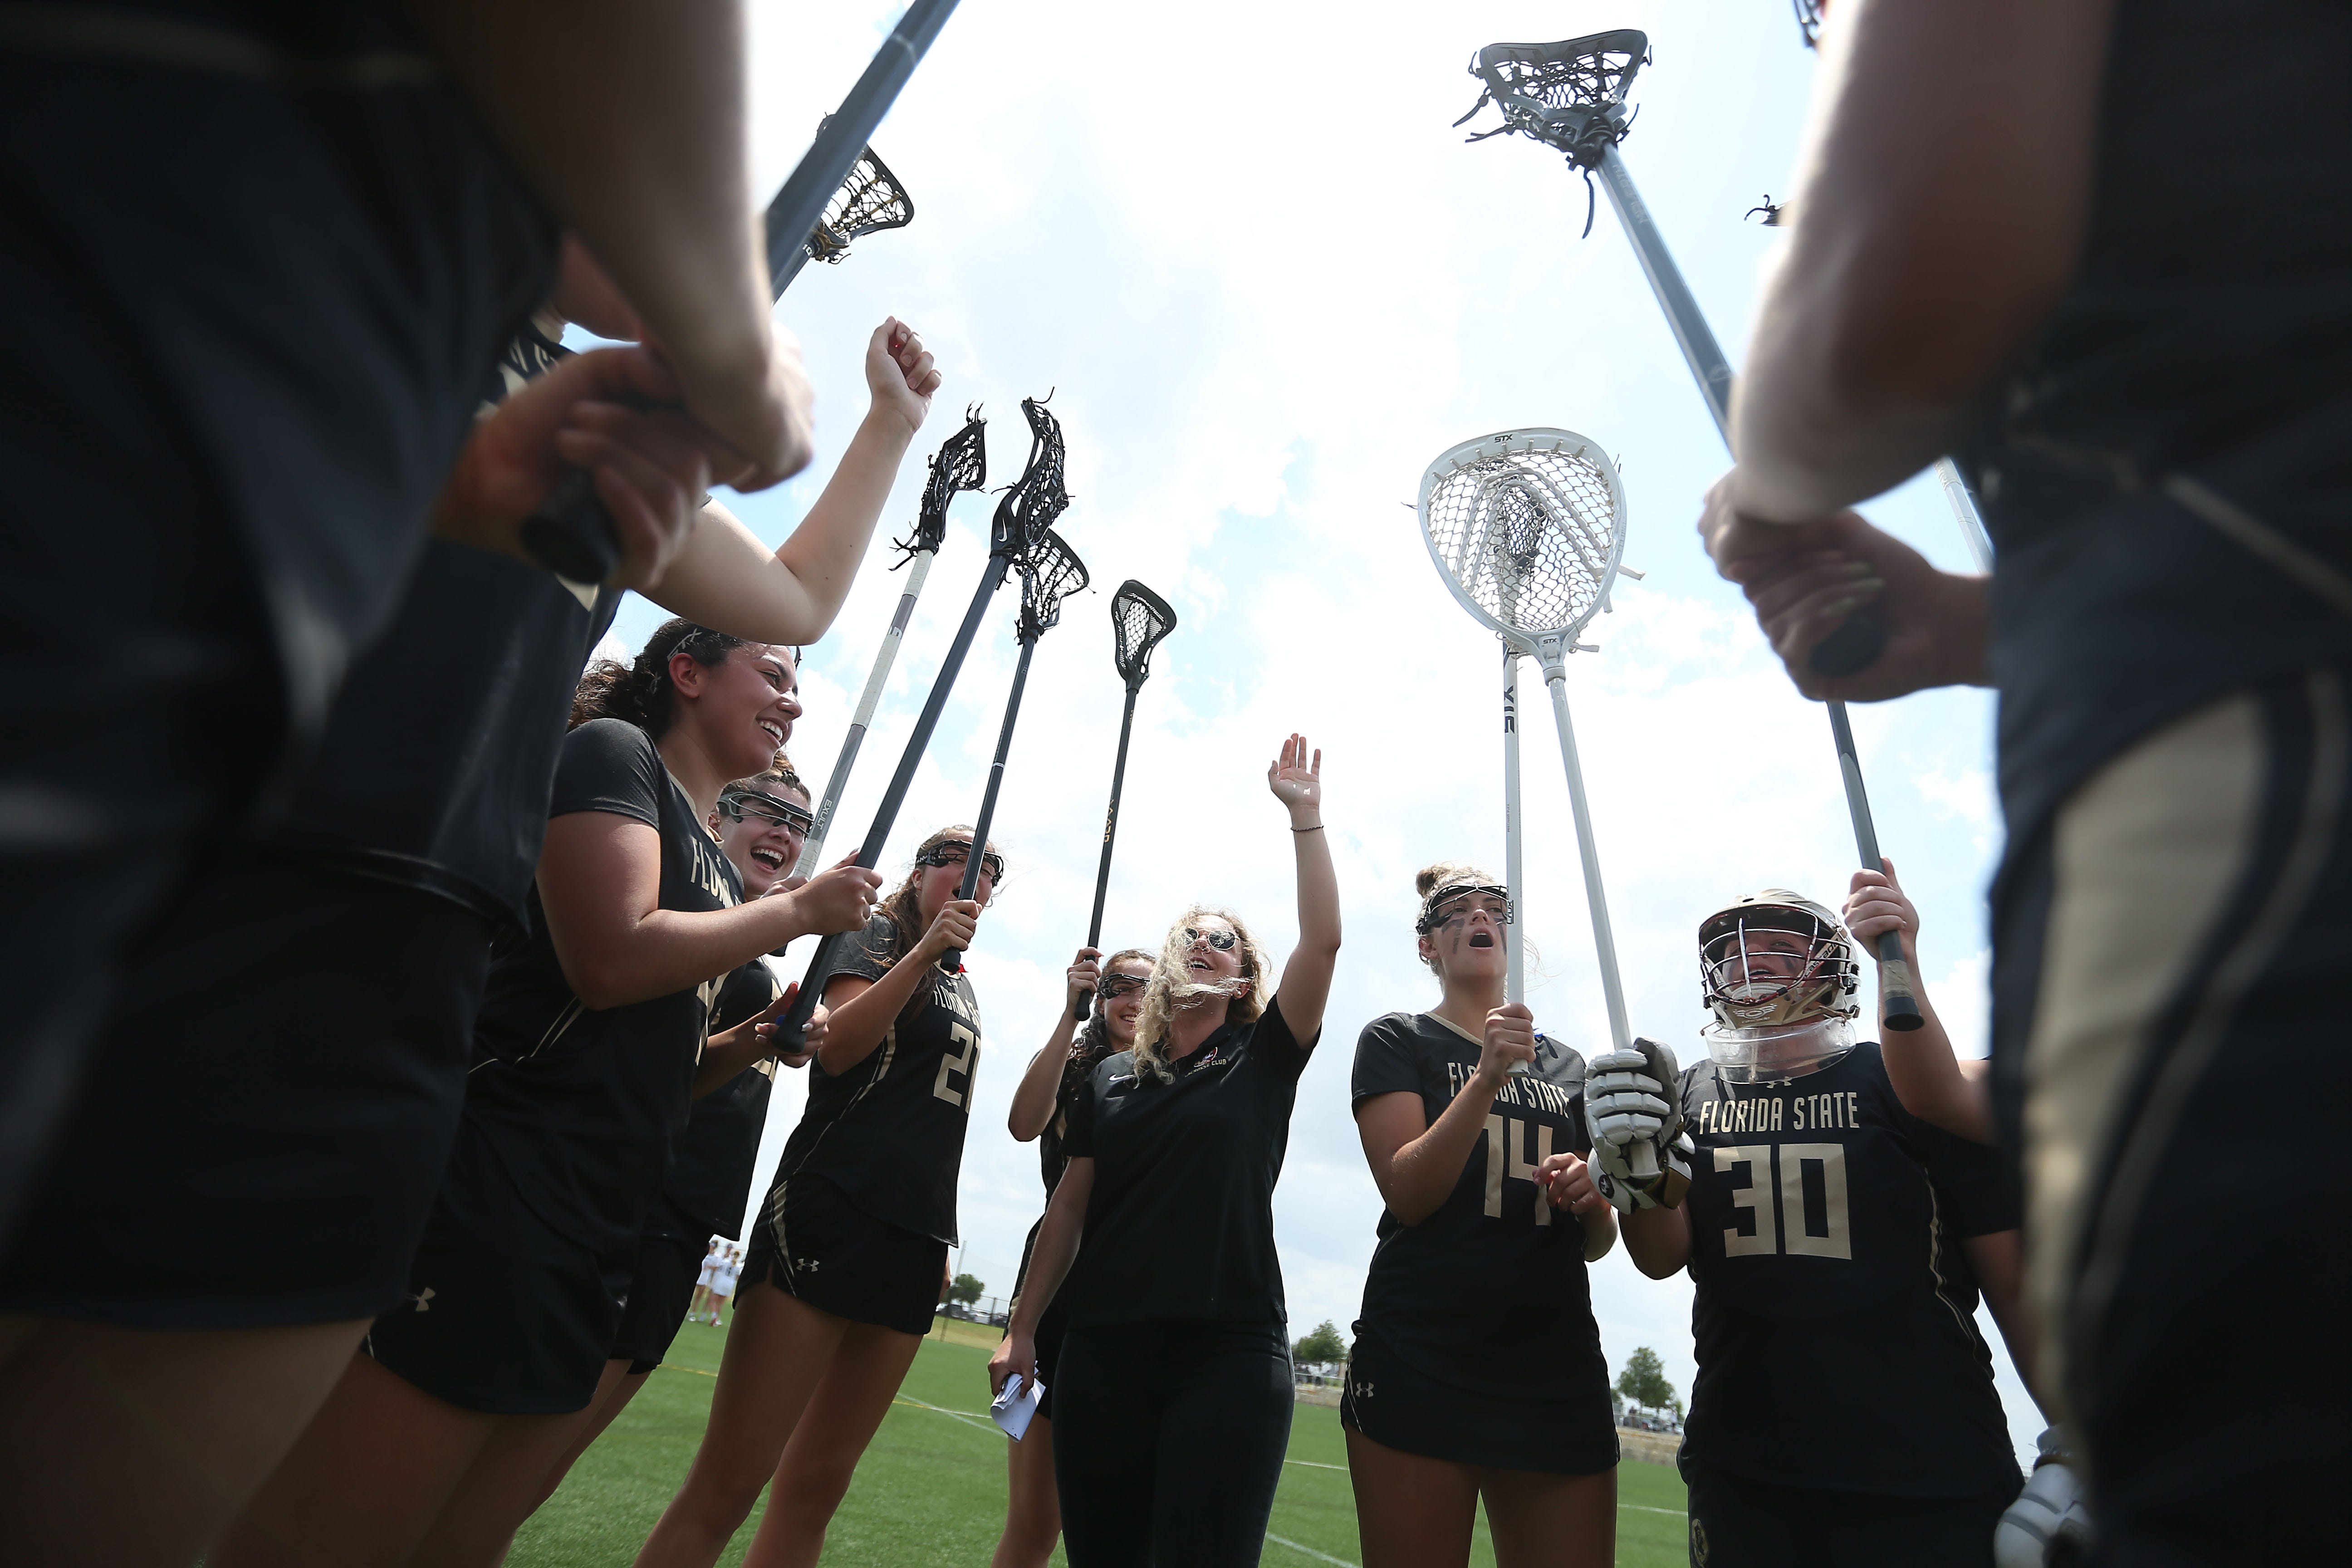 Olivia Friedley, Florida State club lacrosse coach, cheers with the team before their game against BYU in the Women's Collegiate Lacrosse Associates National Championships Wednesday, May 4, 2022, in Round Rock, Texas.